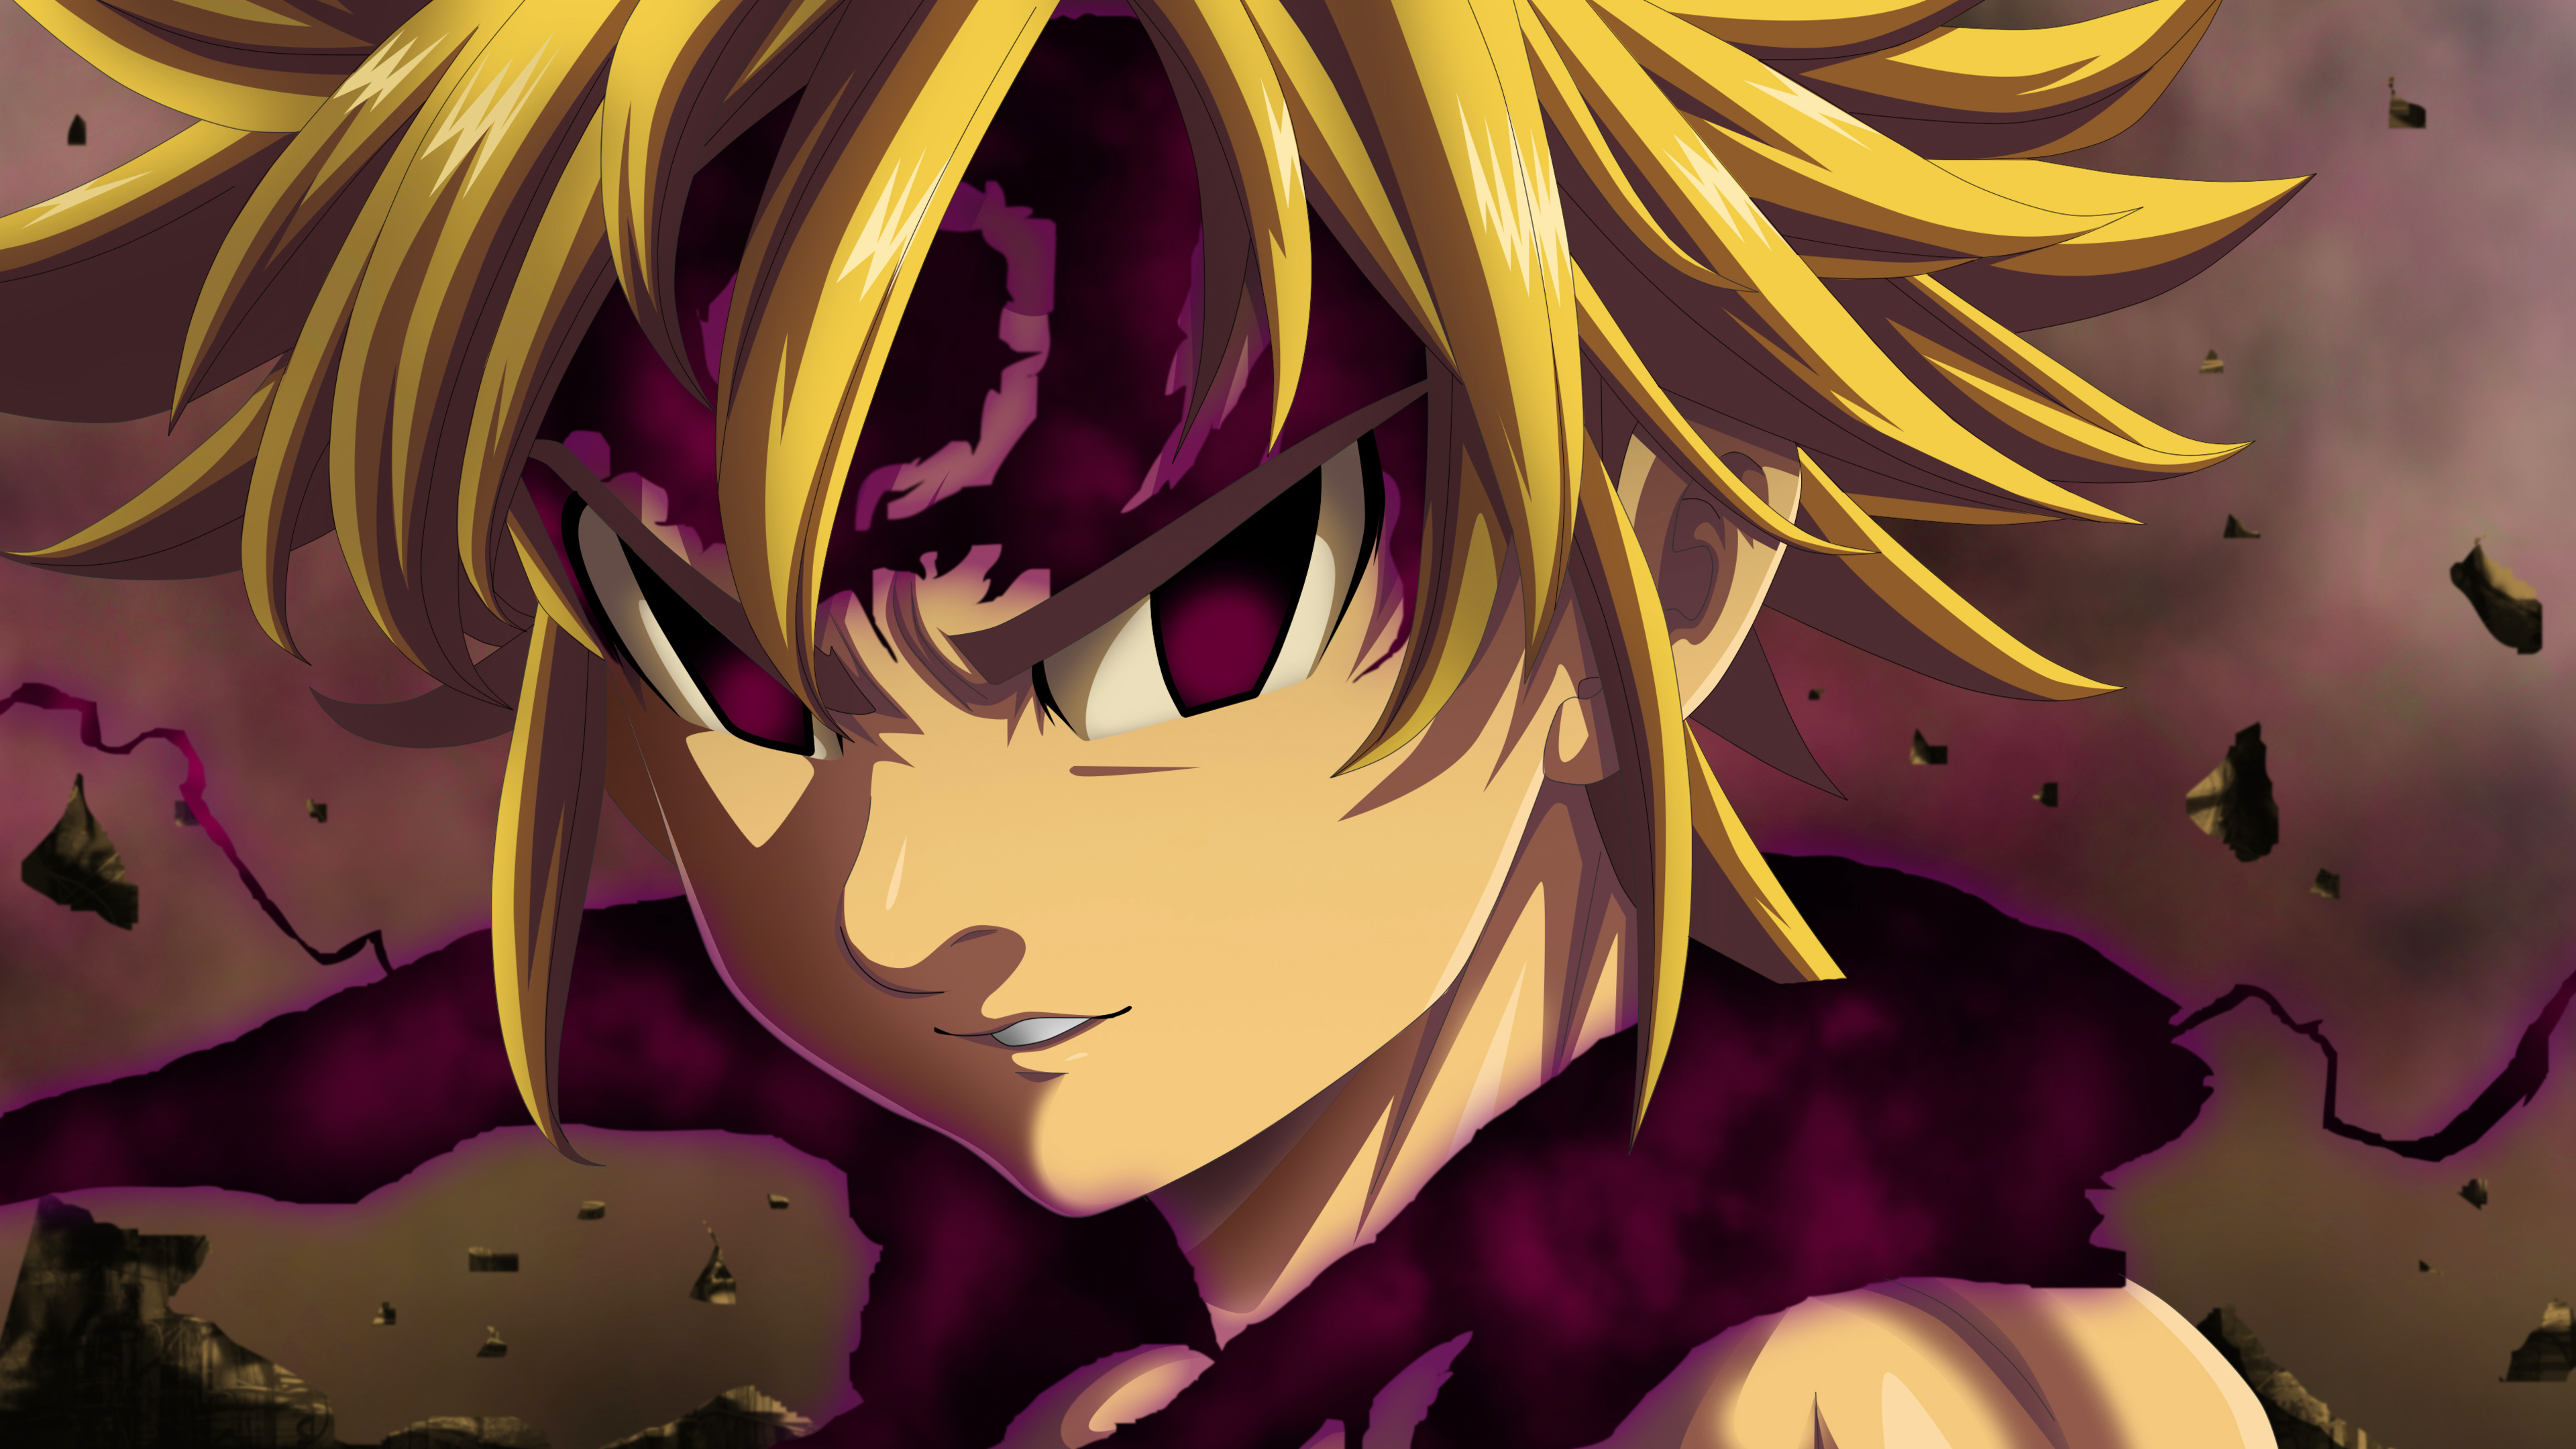 Free Download Wallpaper 4k The Seven Deadly Sins 4k Wallpapers Anime